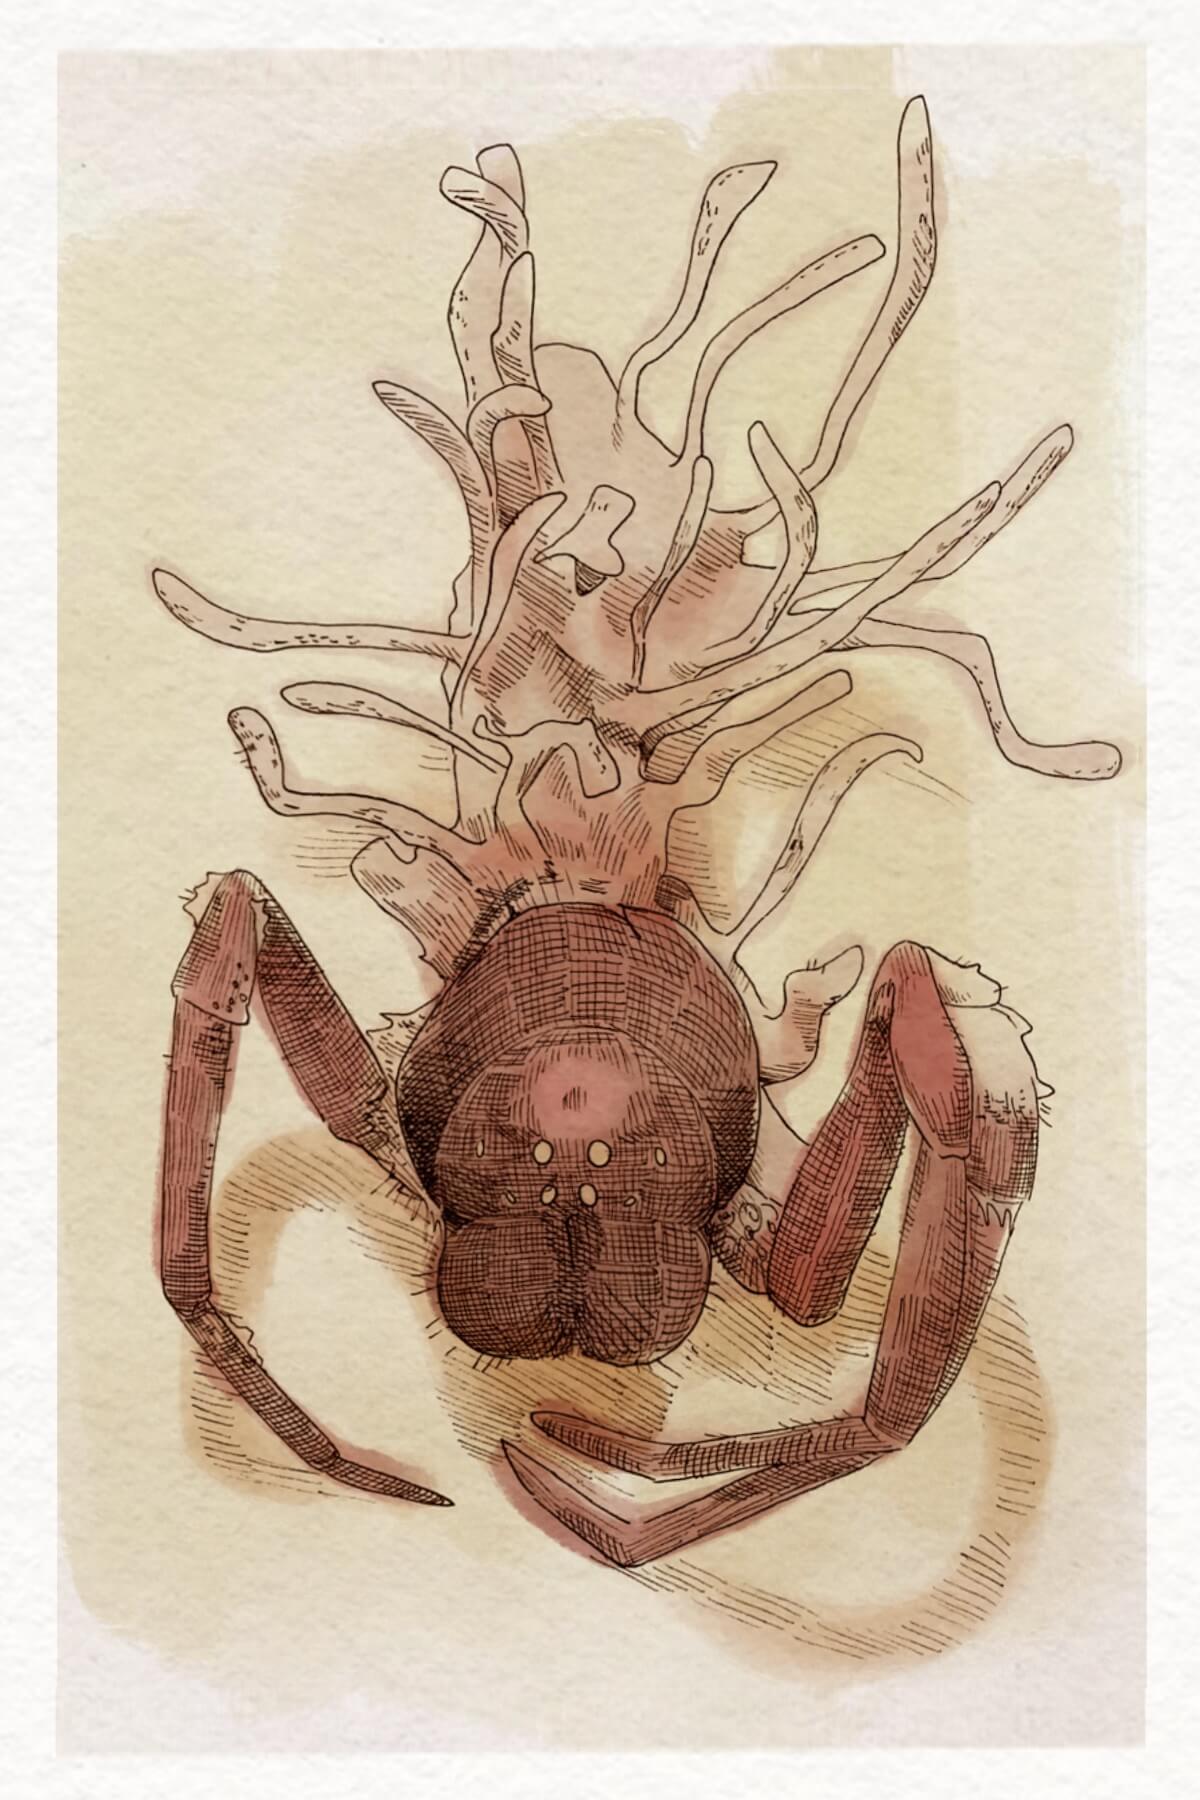 Illustration of spider head with two front legs and tendrils instead of a thorax